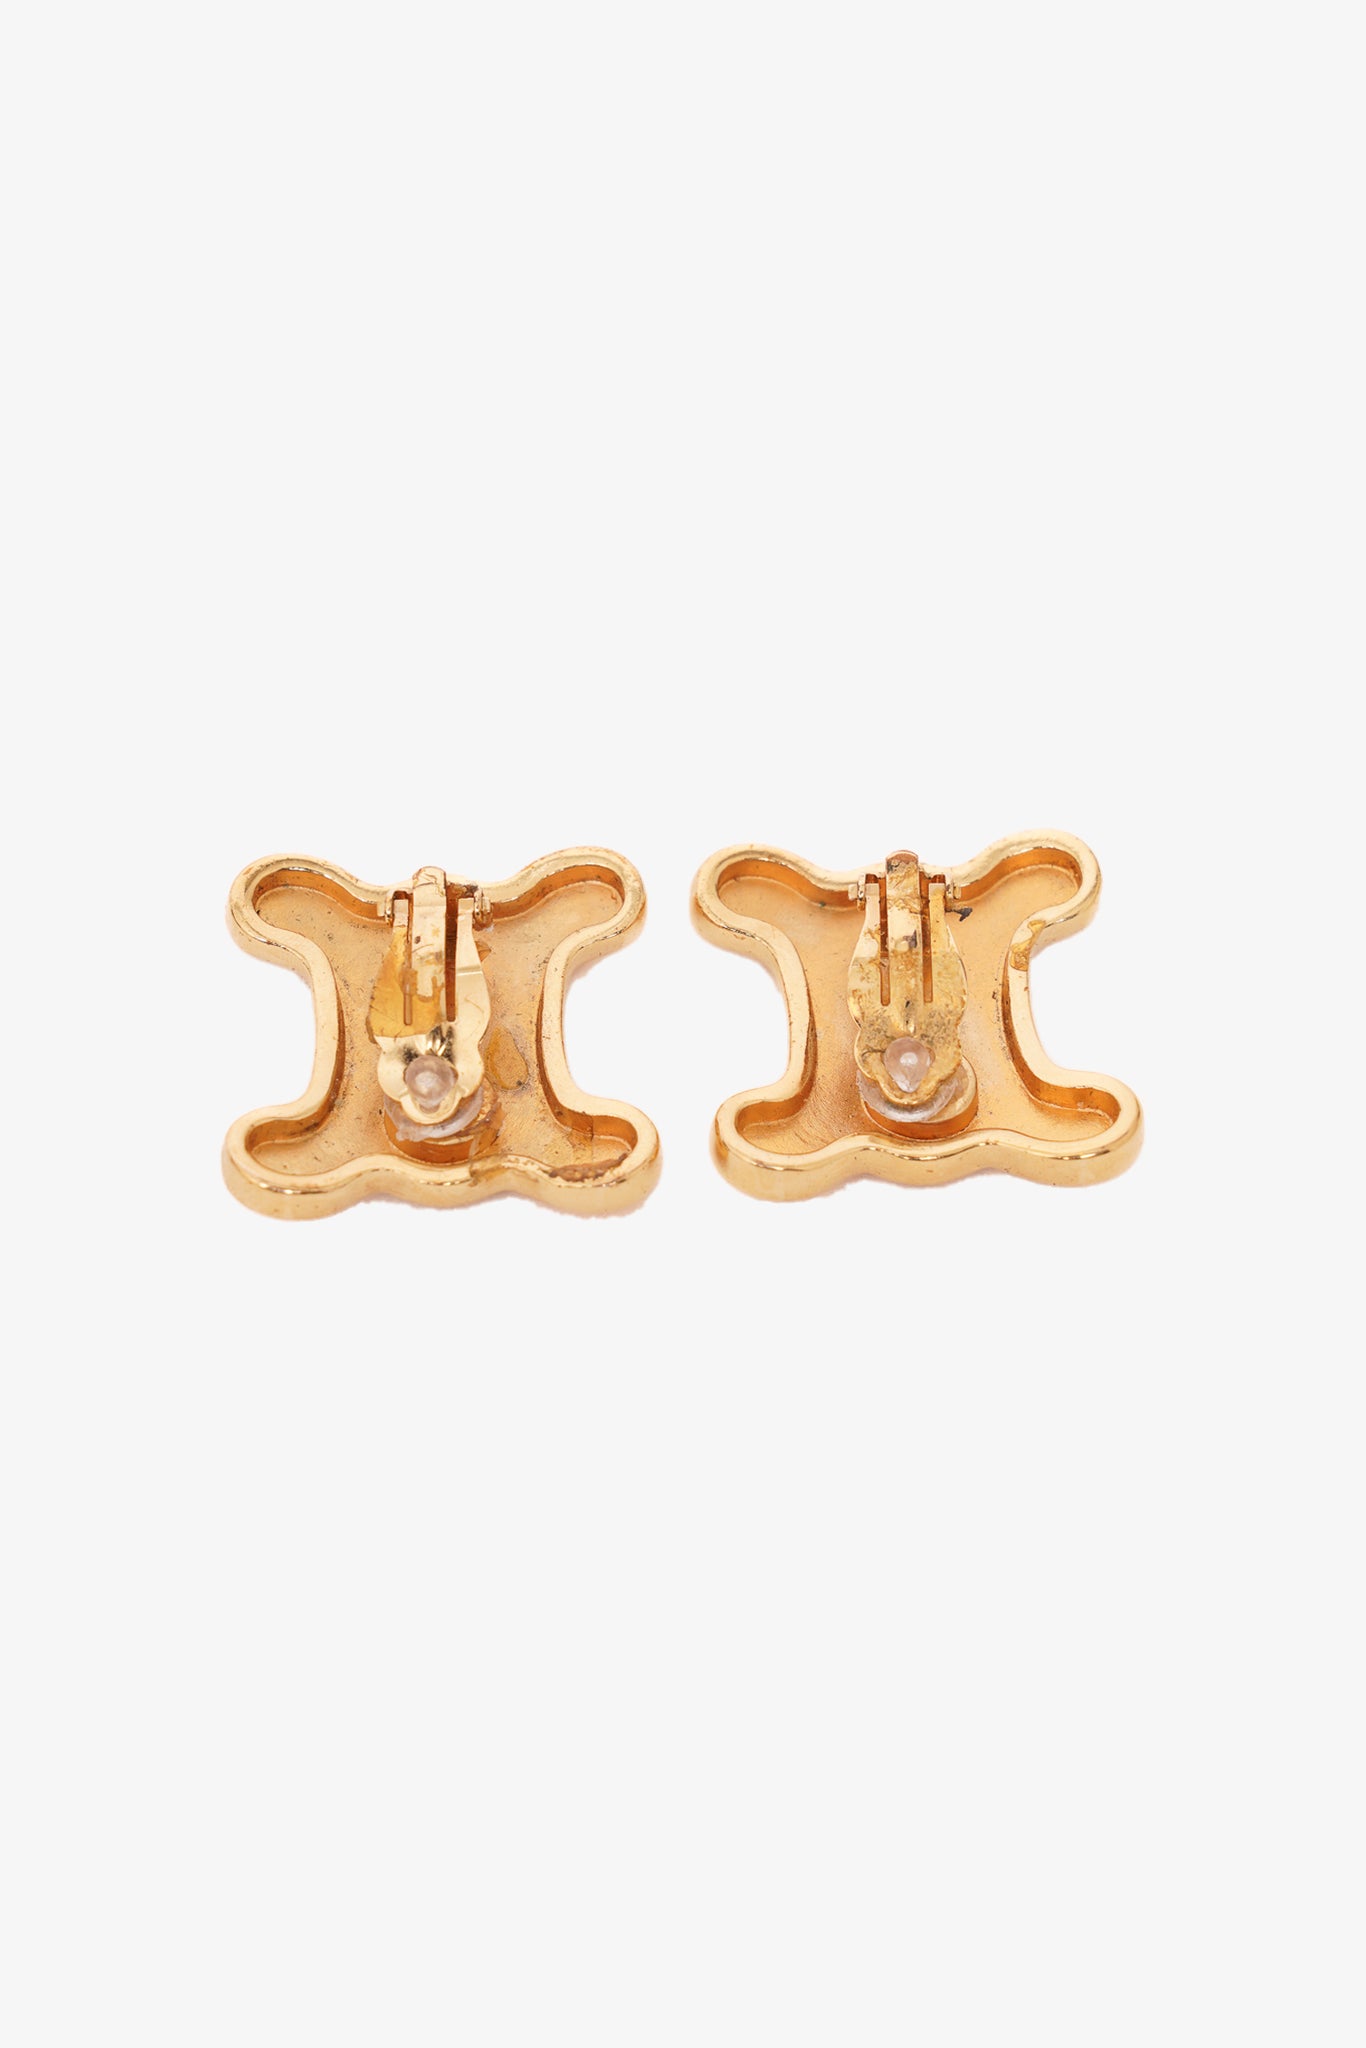 Delivered directly from Japan in used packaging] CELINE Triomphe Clip-On  gold vintage vintage old eg5uy5 - Shop solo-vintage Earrings & Clip-ons -  Pinkoi